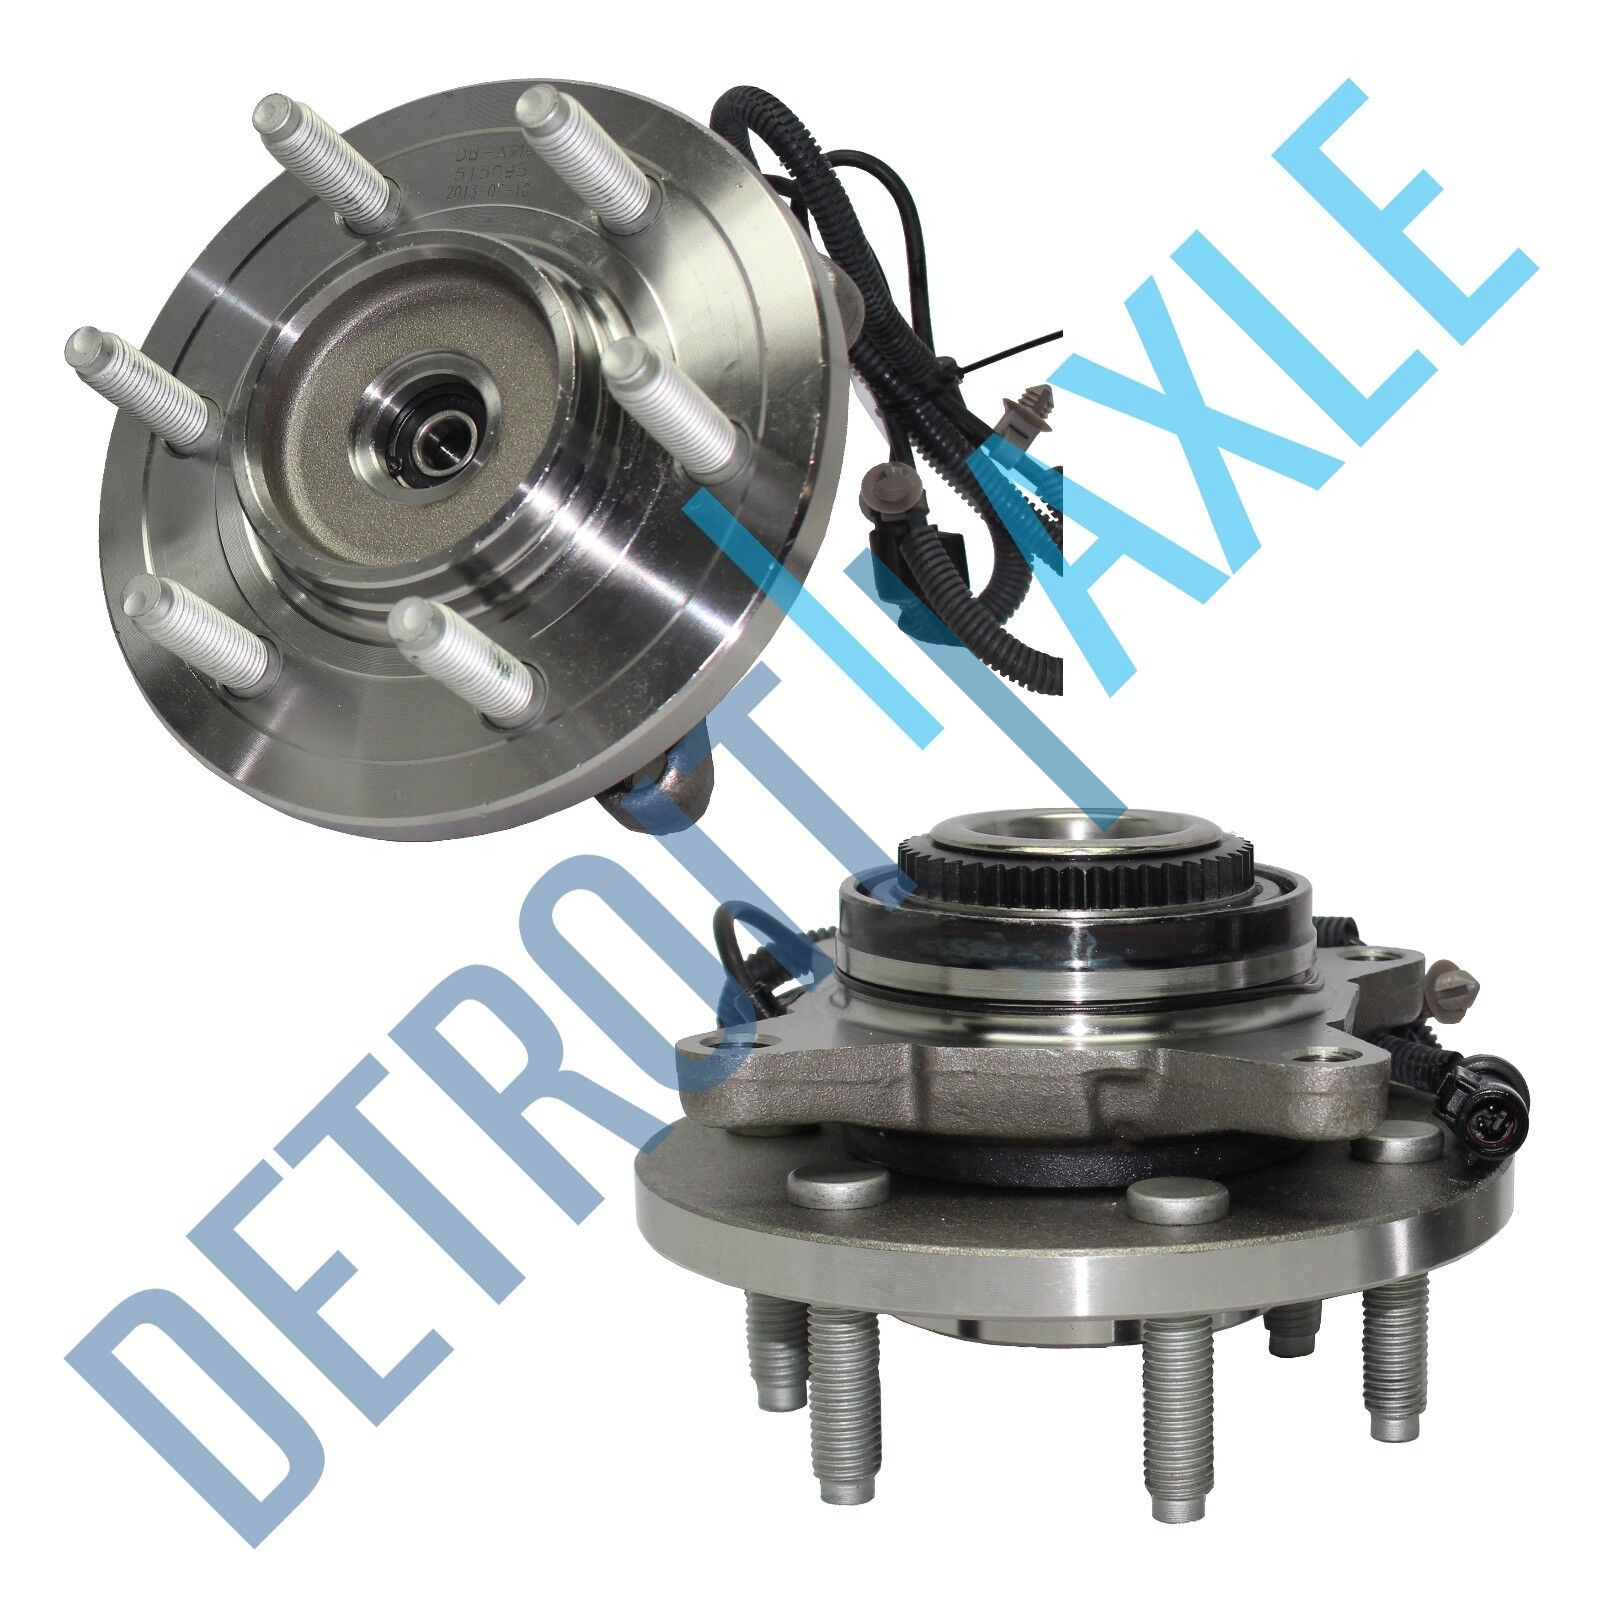 2 New FRONT Navigator Expedition 2007-2010 Wheel Hub And Bearing - w/ ABS - 4x4 